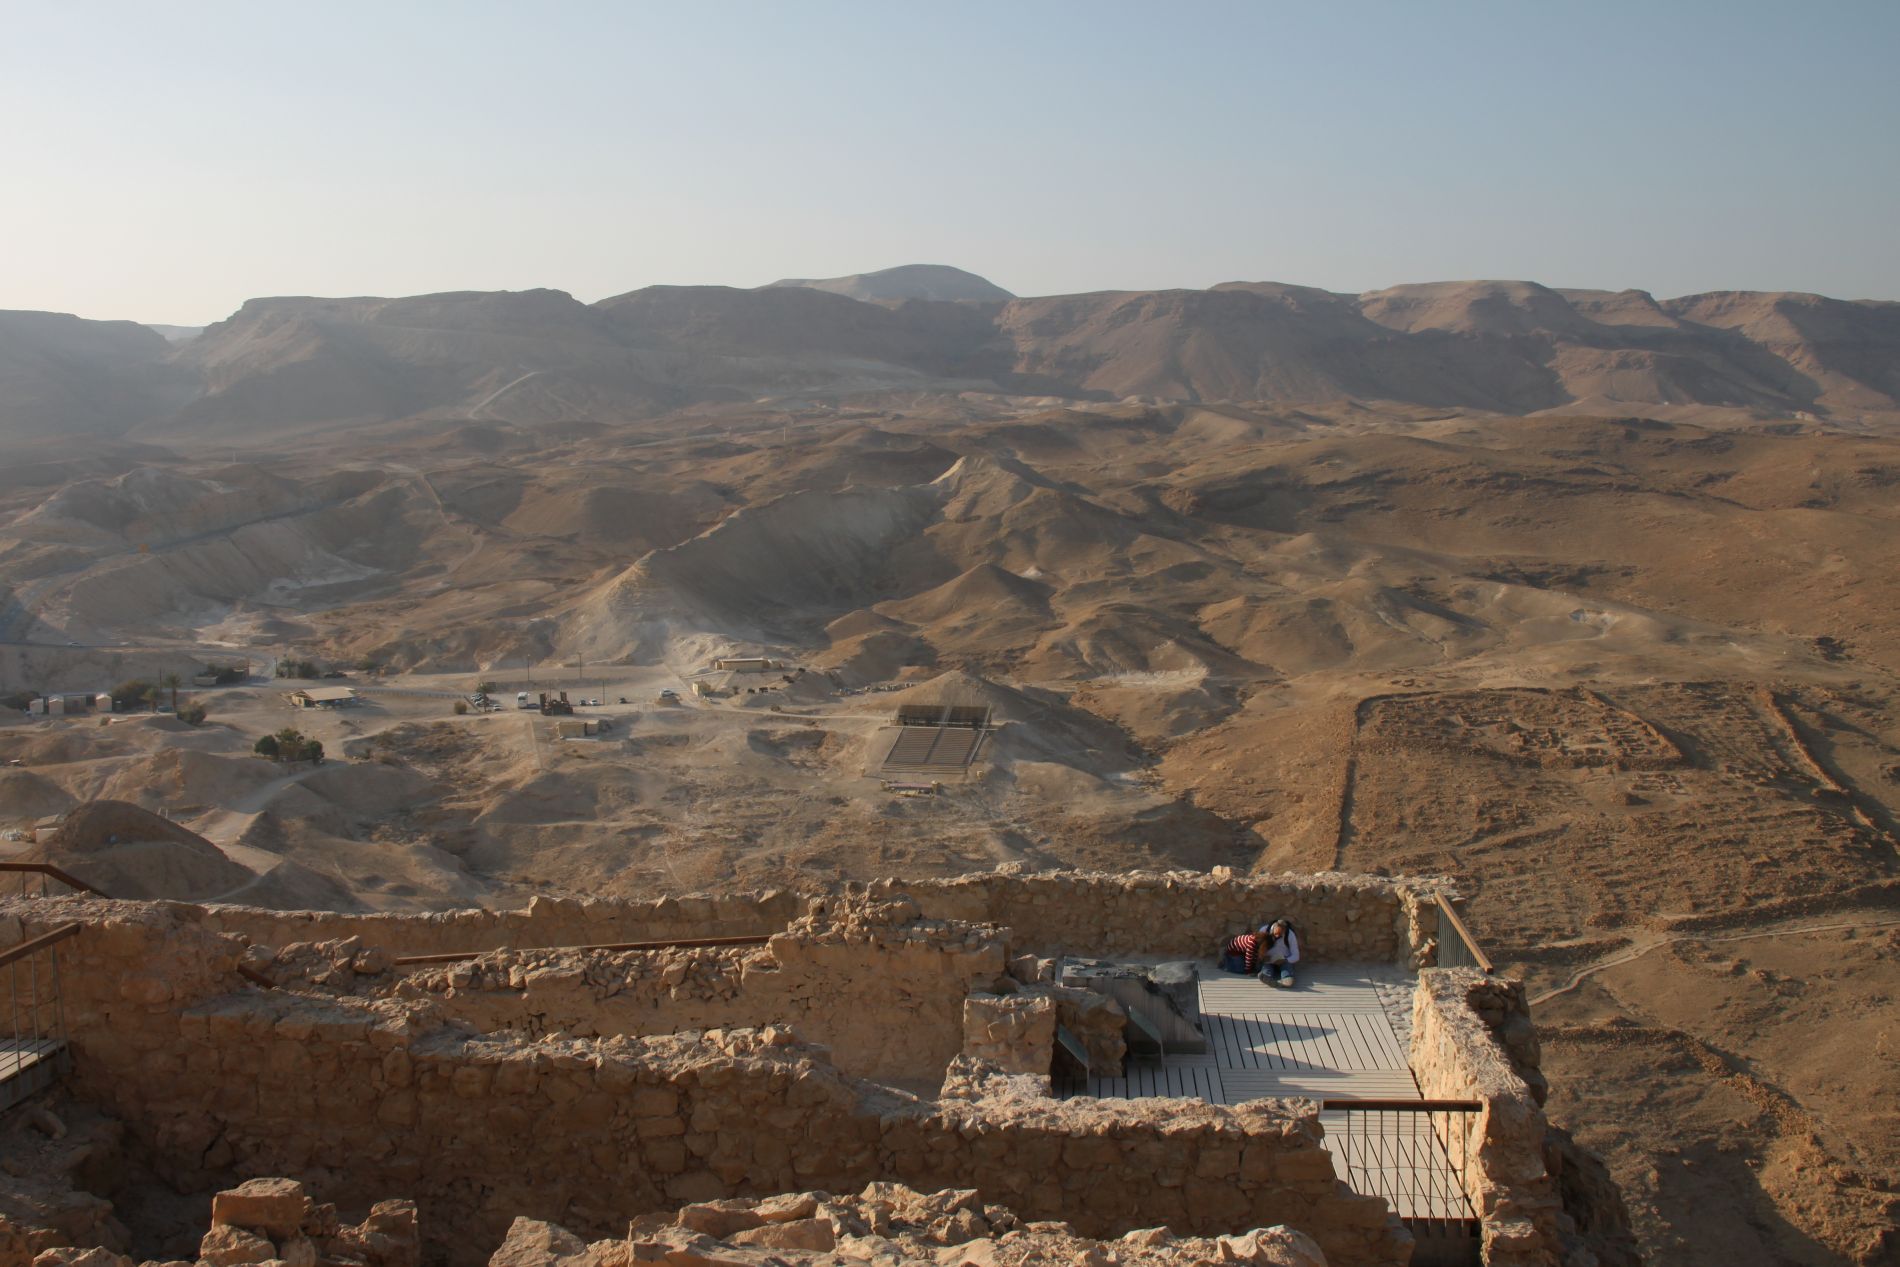 A view of the surrounding desert as seen from the top of Masada.